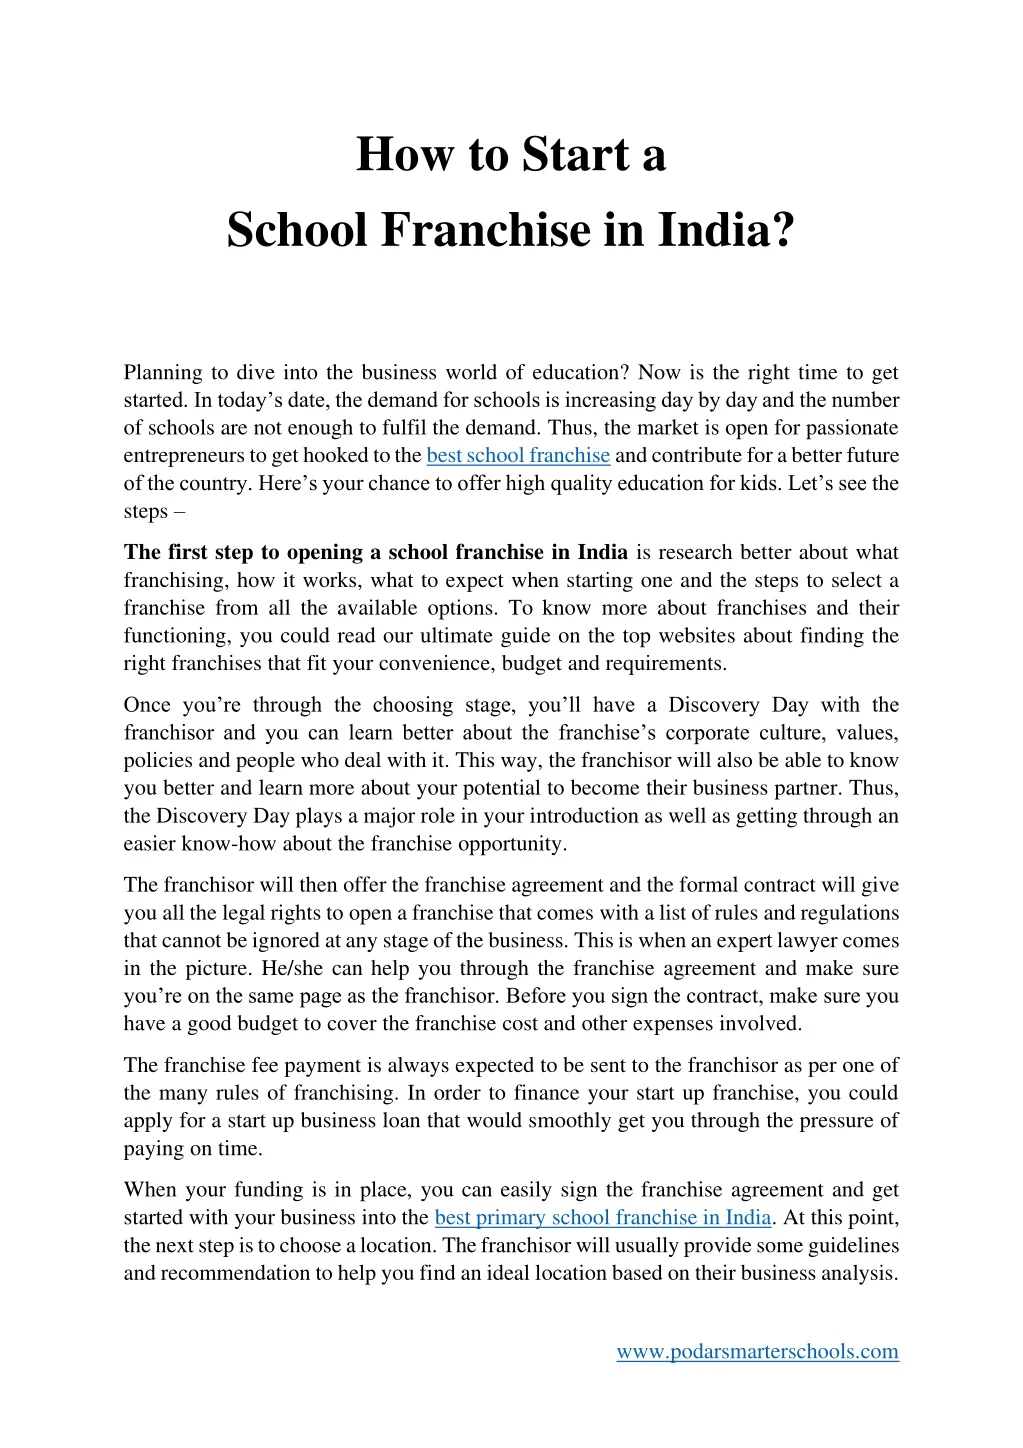 how to start a school franchise in india